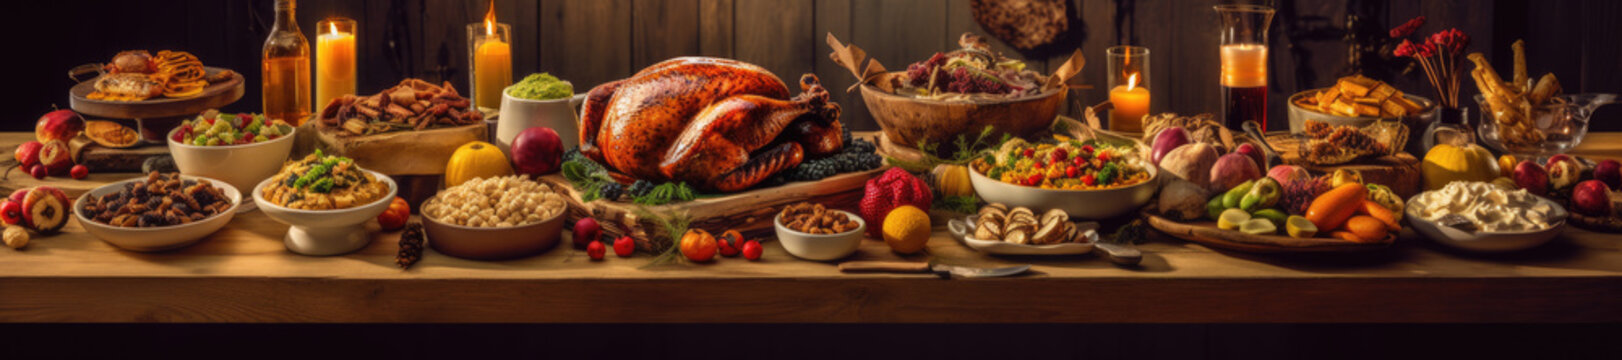 Thanksgiving or Christmas feast, rustic table spread